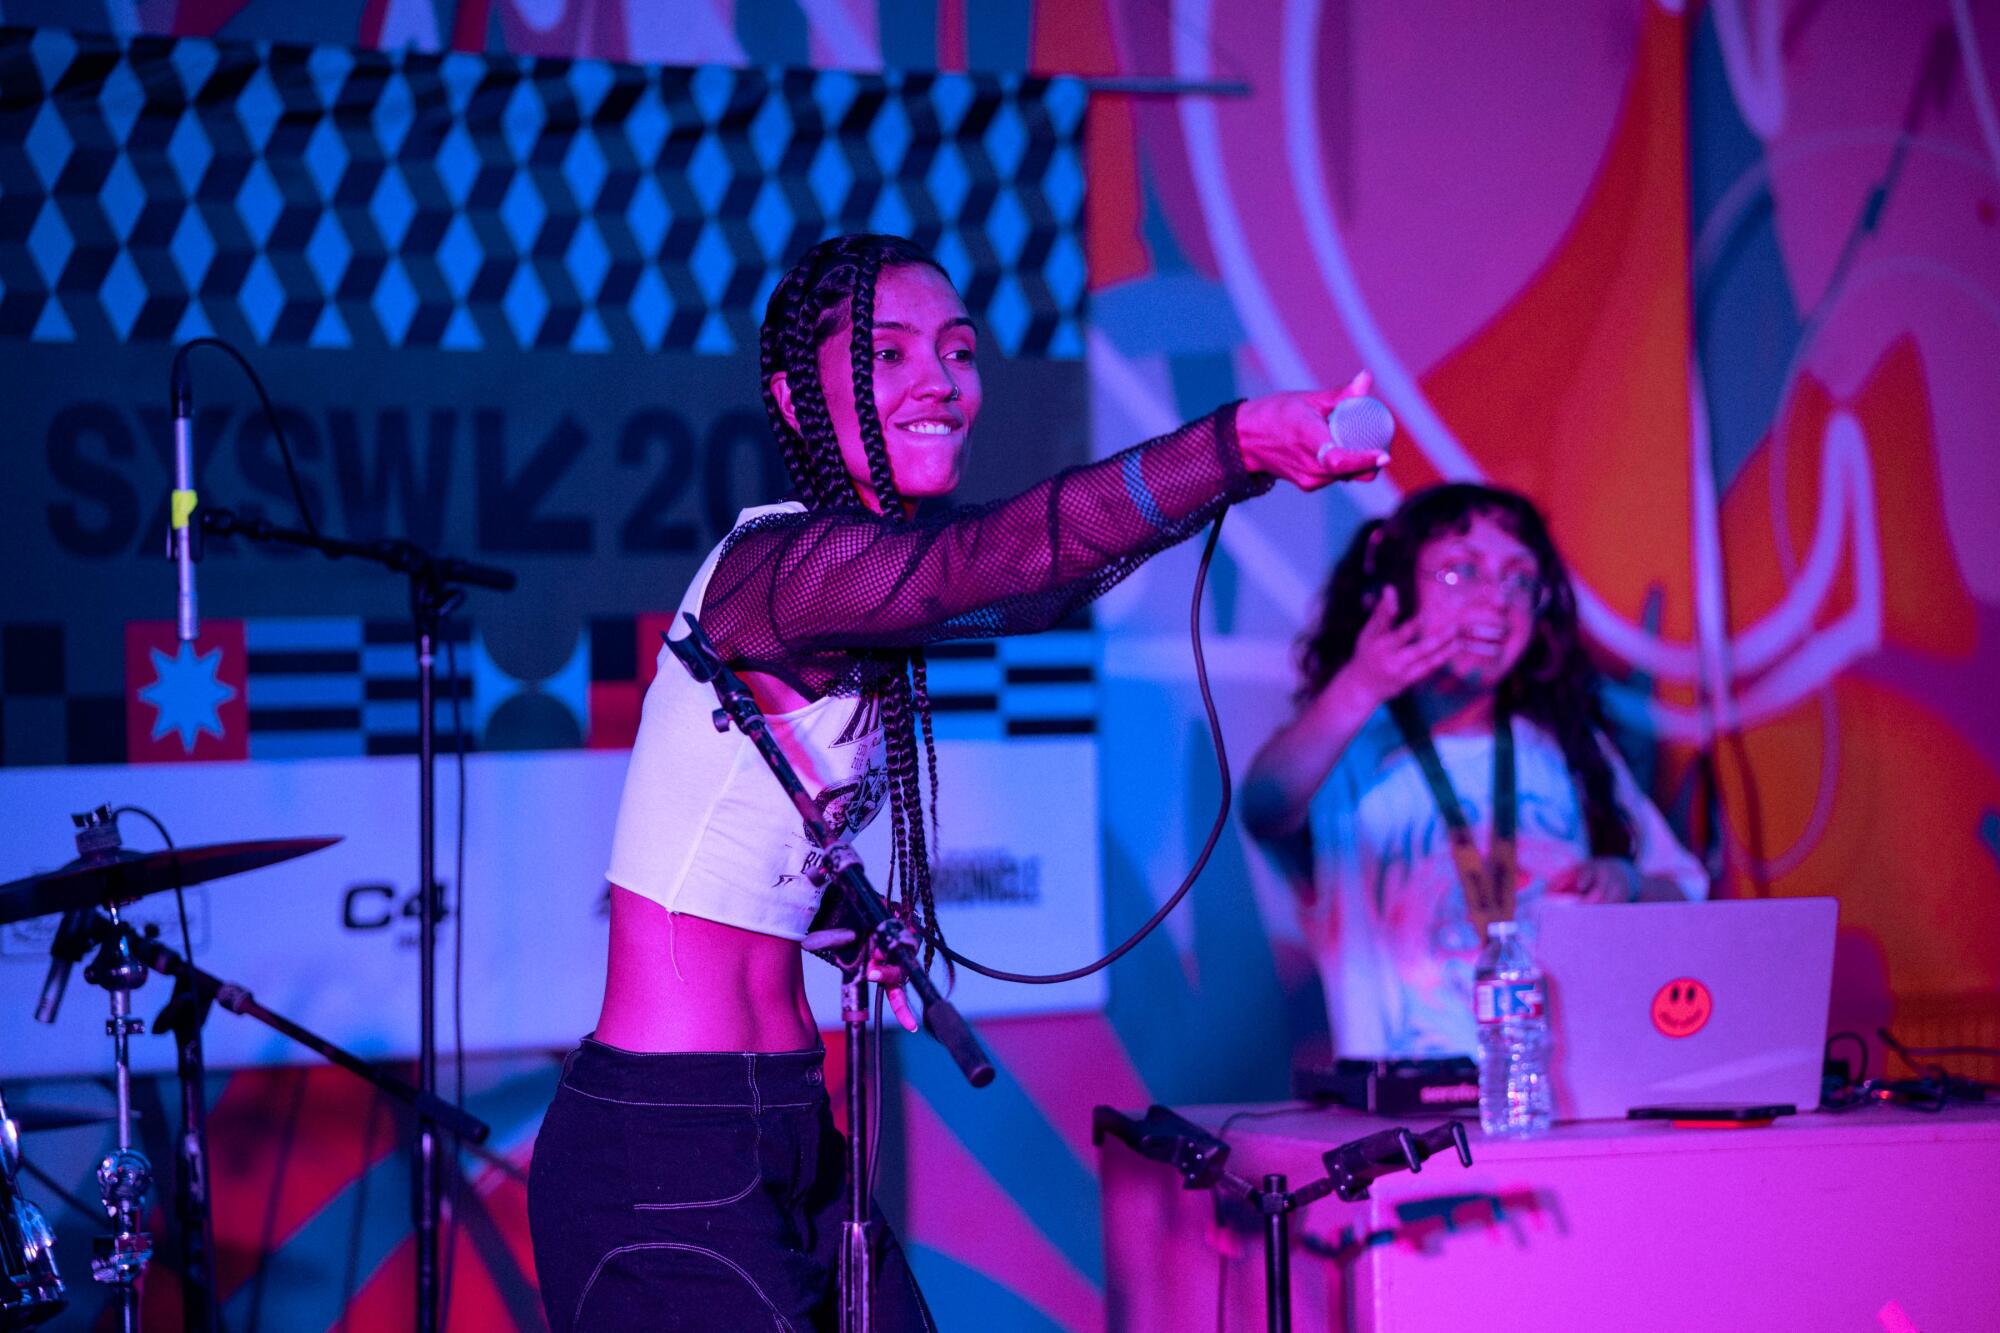 Nohemy performs her self-described "hype music" at the De Los showcase at SXSW on March 15.